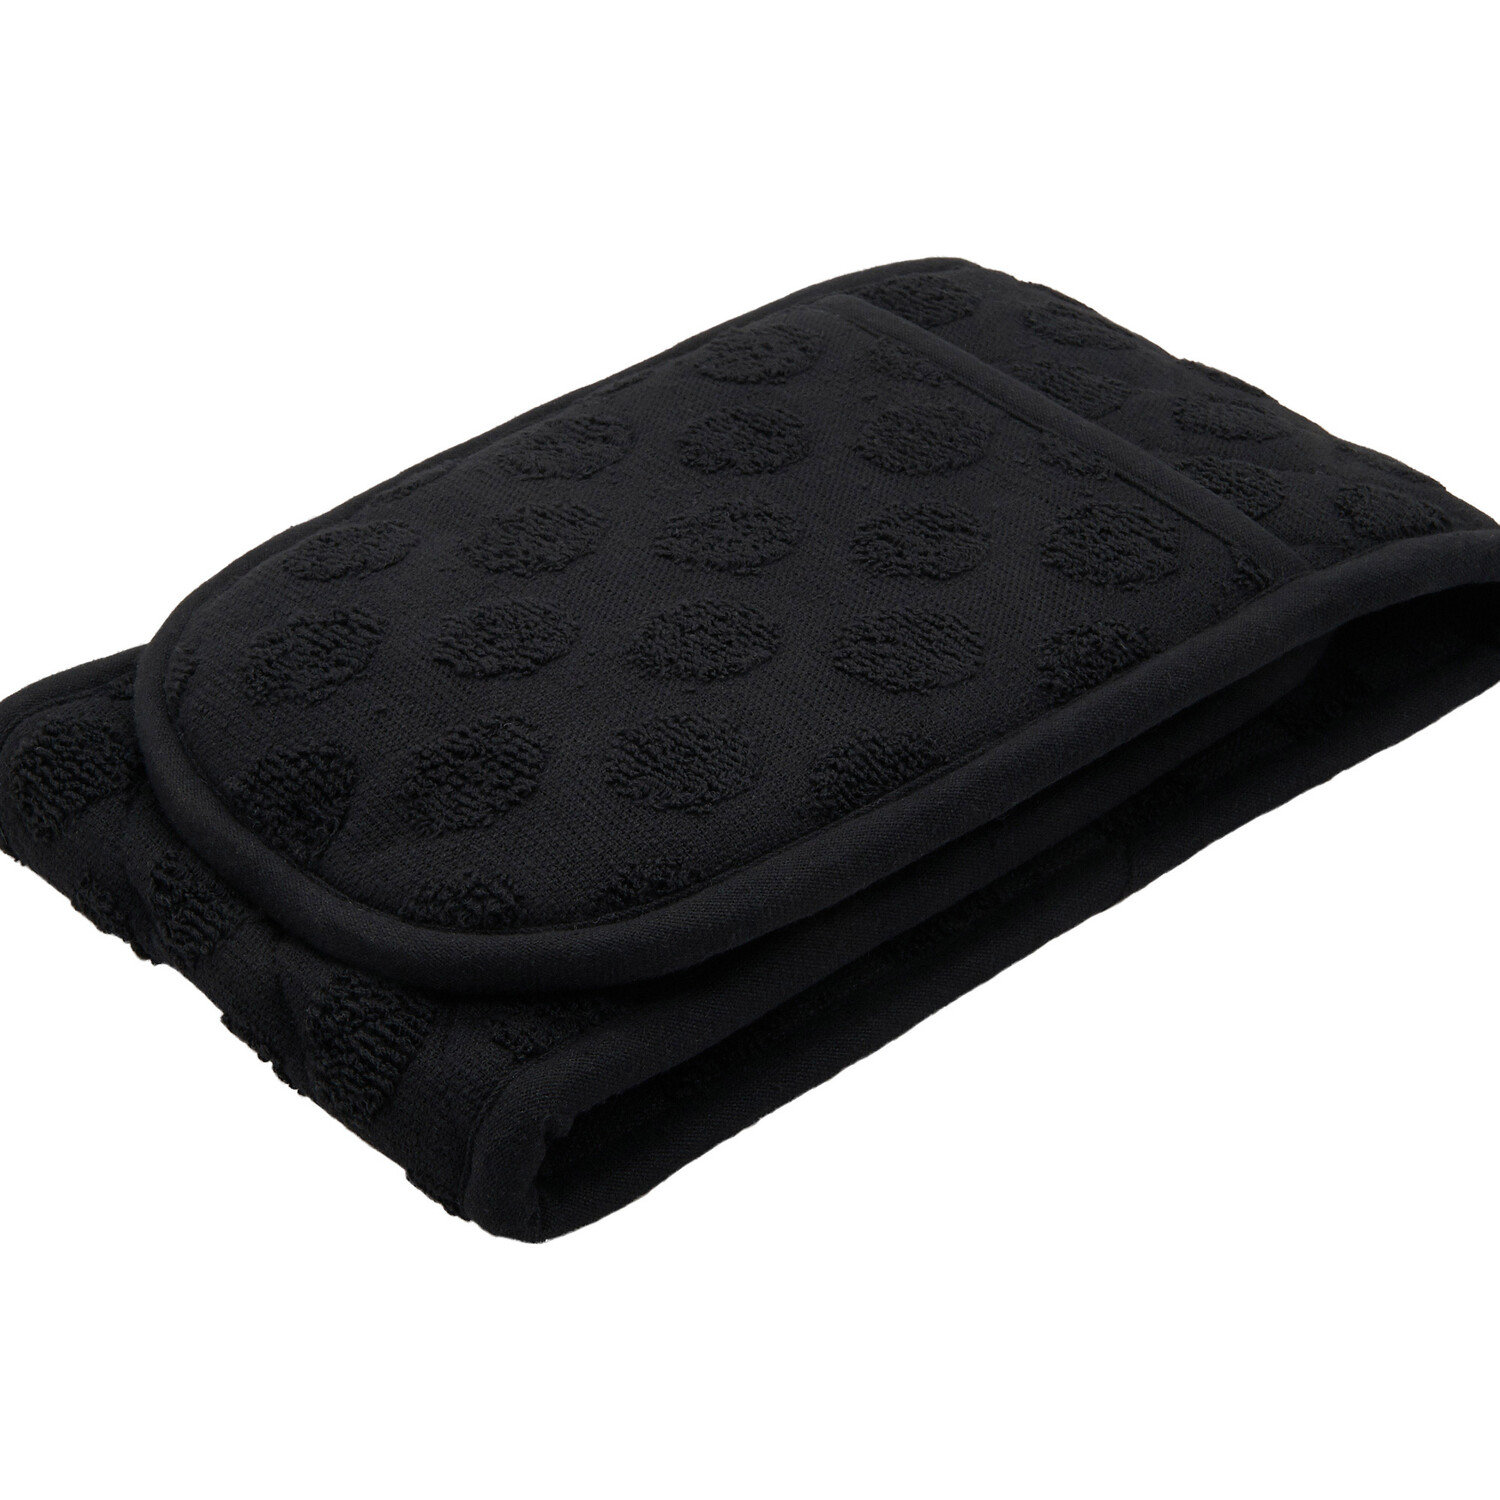 Dobby Terry Double Oven Glove - Black Image 3